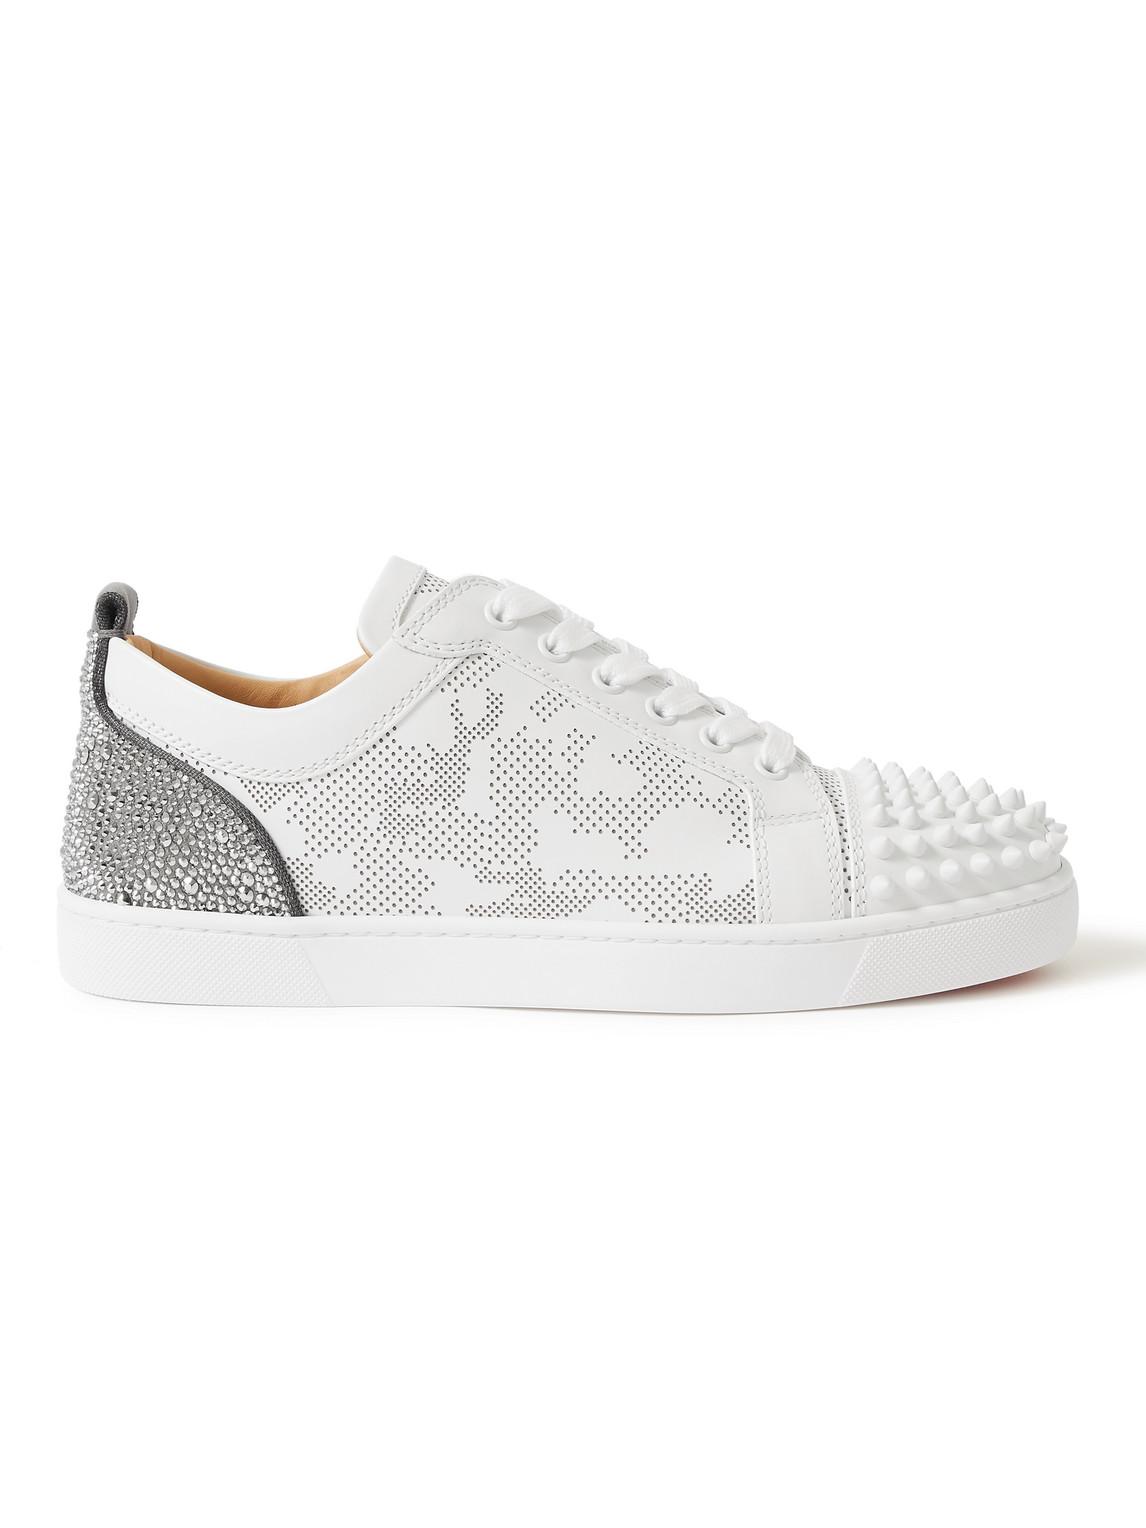 Christian Louboutin Junior Spikes Perforated Leather Sneakers in White for Men